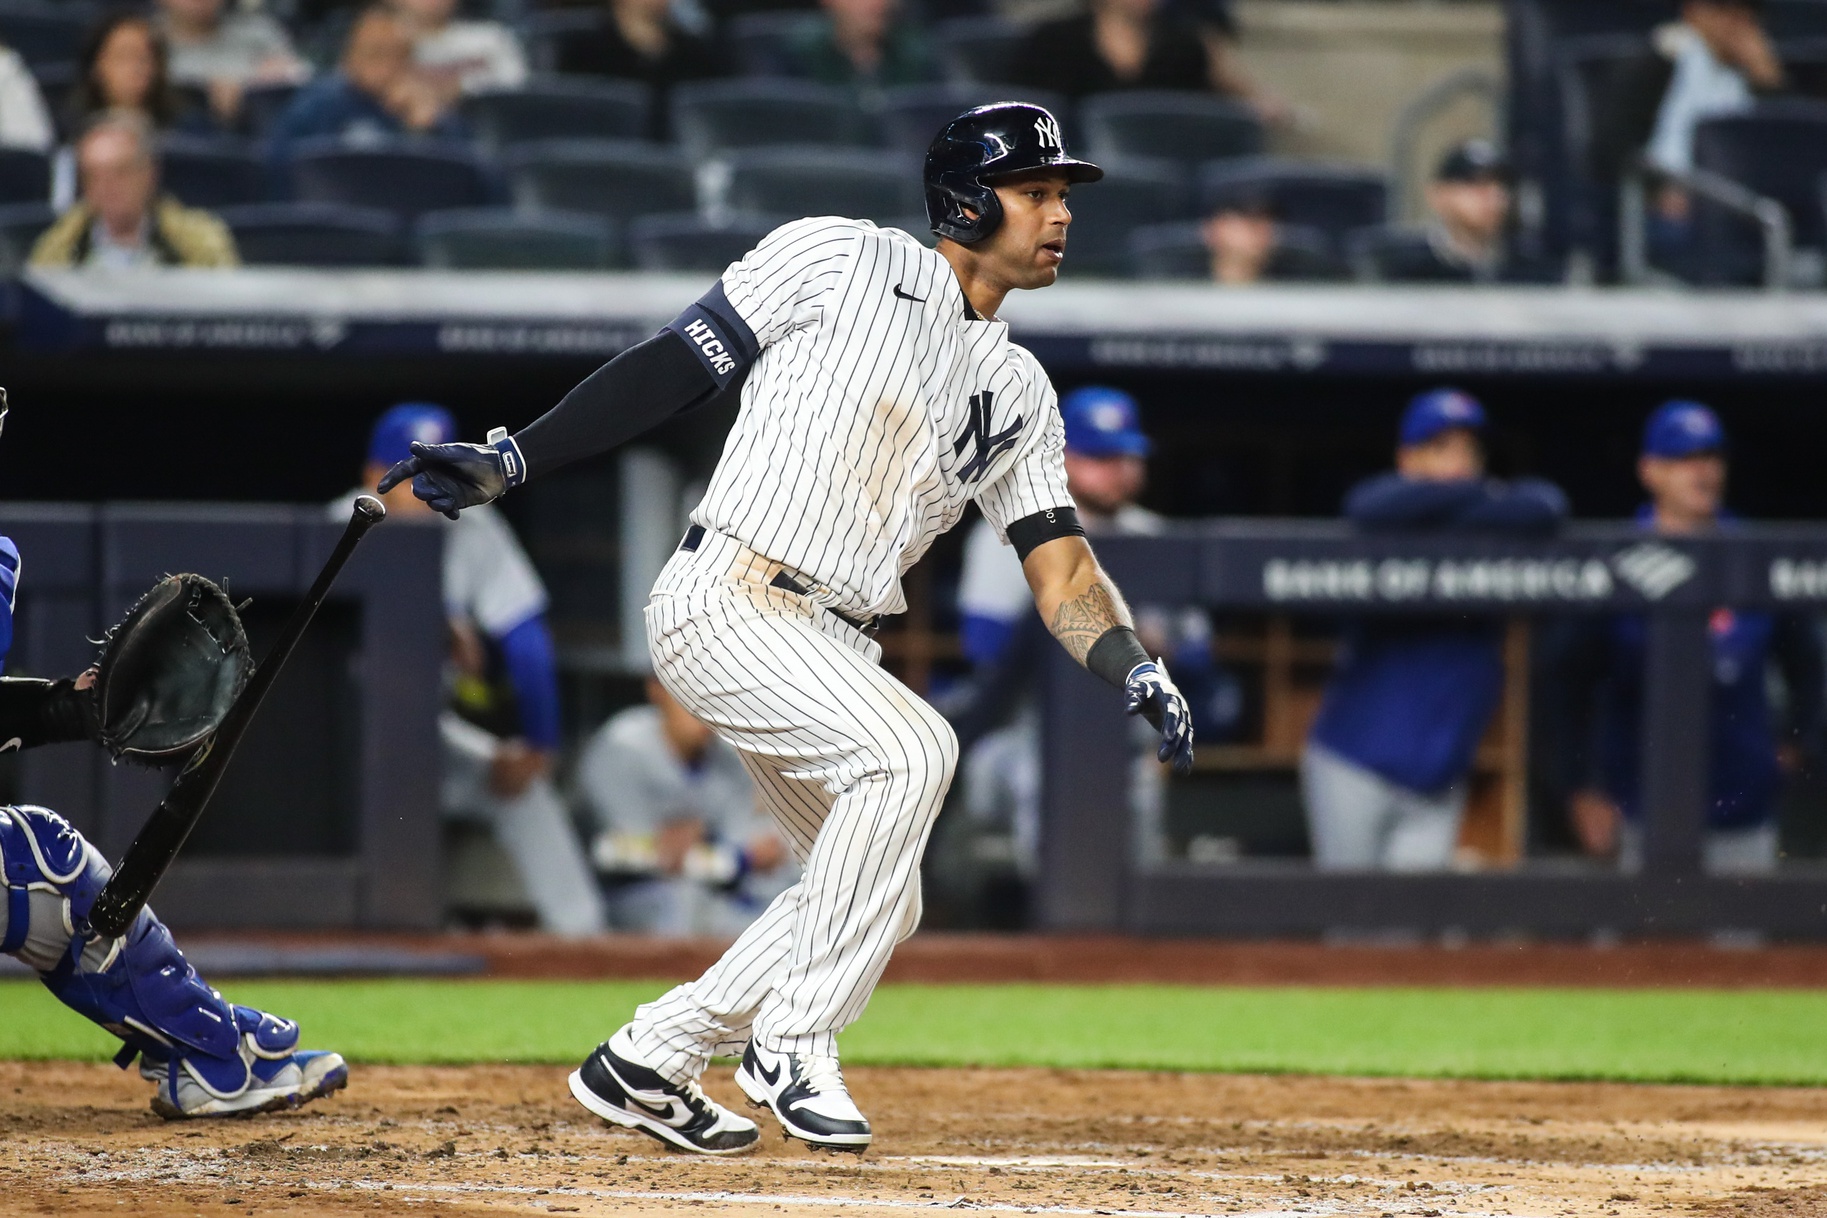 Blame Game Begins as Yankees Bowed Out: Aaron Hicks Shines with Orioles,  Raising Questions about Coaching and Culture in New York - BVM Sports